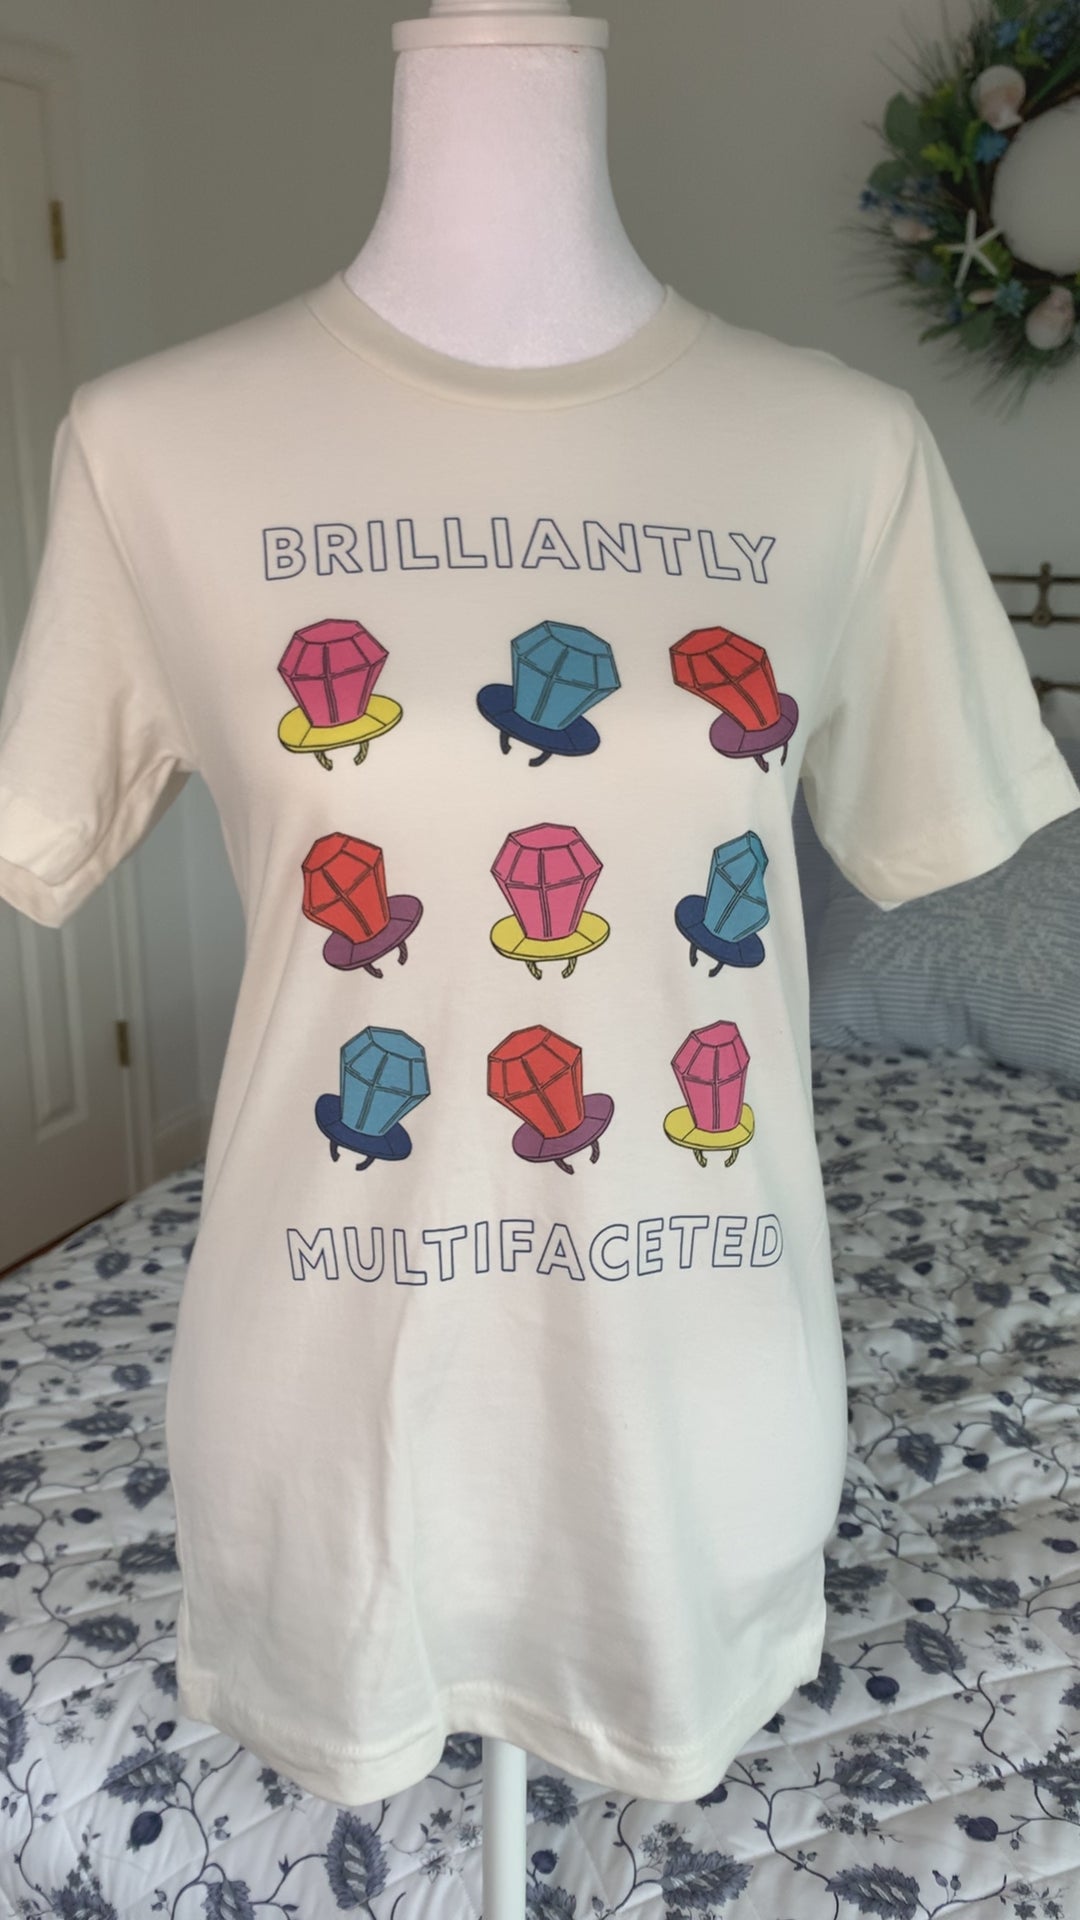 A white t-shirt that reads "Brilliantly Multifaceted" hangs on a manikin